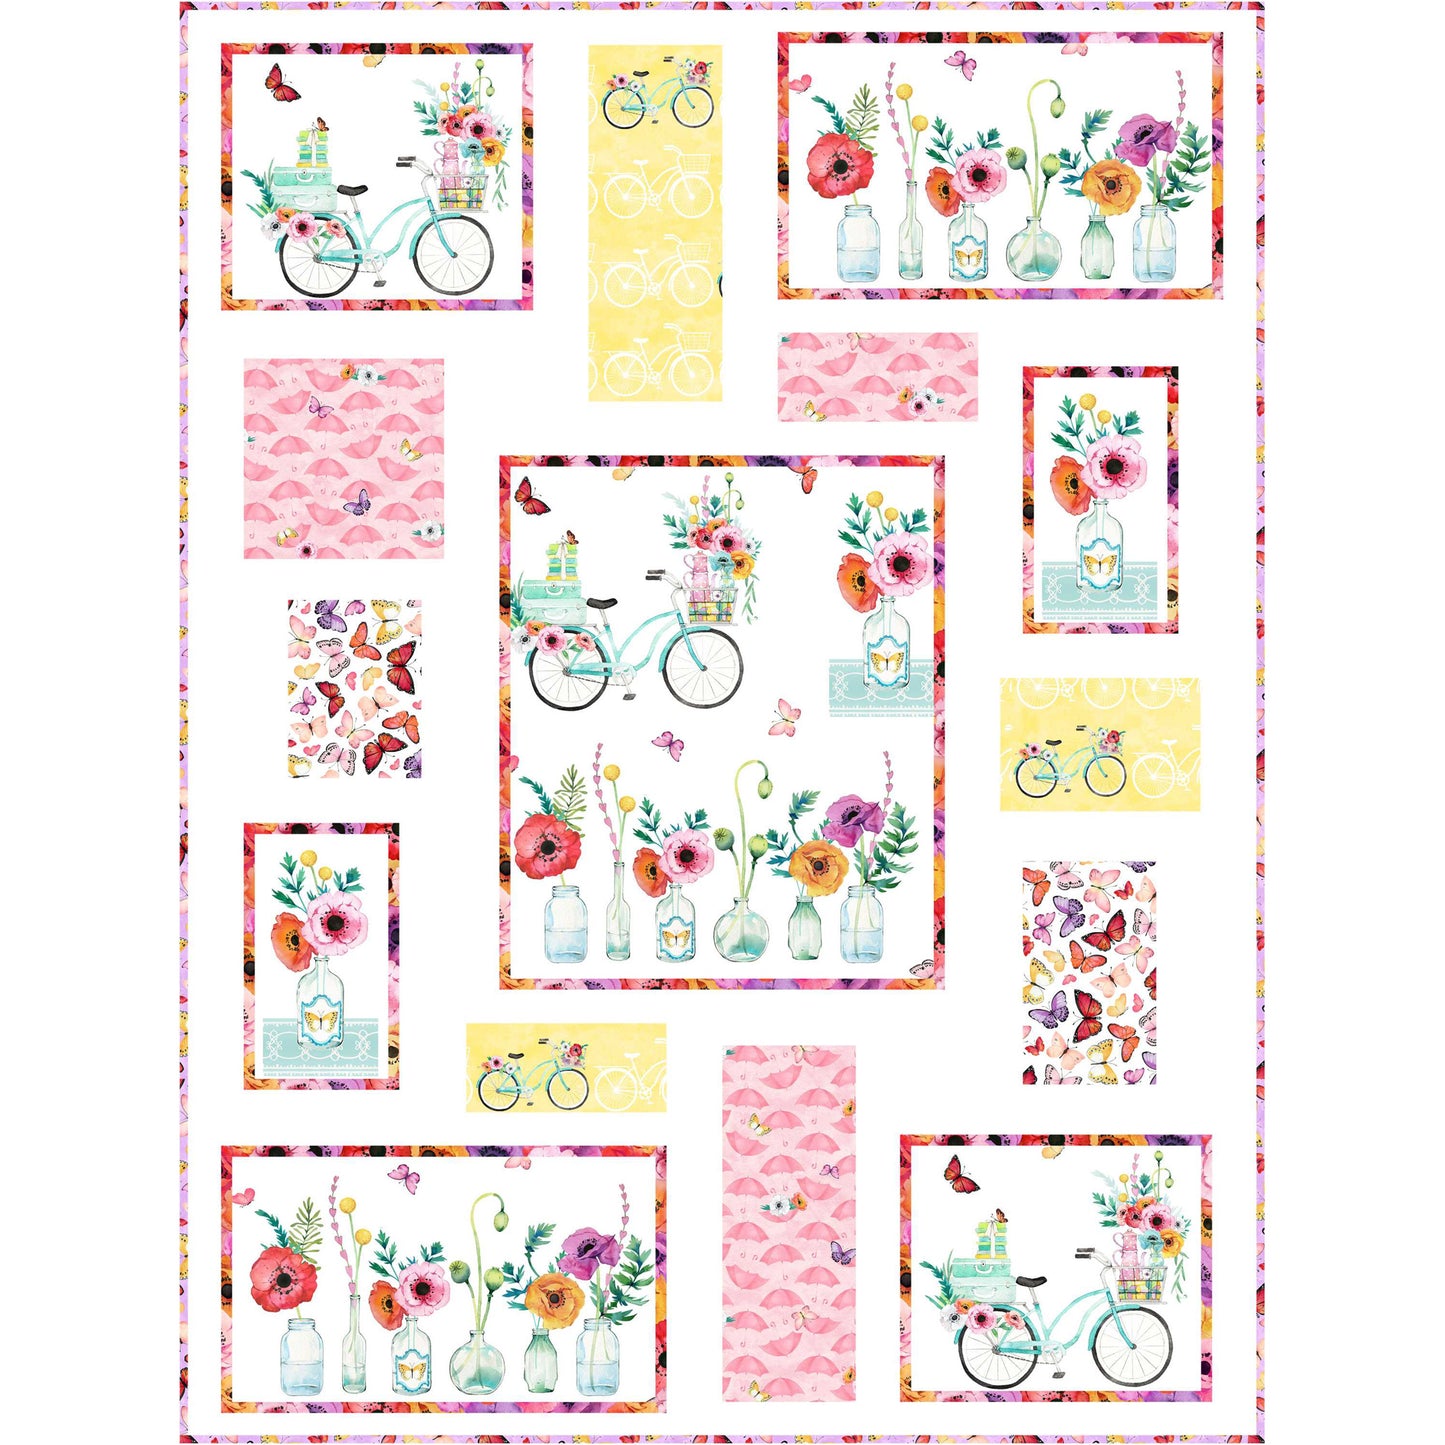 Colorful quilt with flowers and bicycles in pretty pinks and blues with a white background.